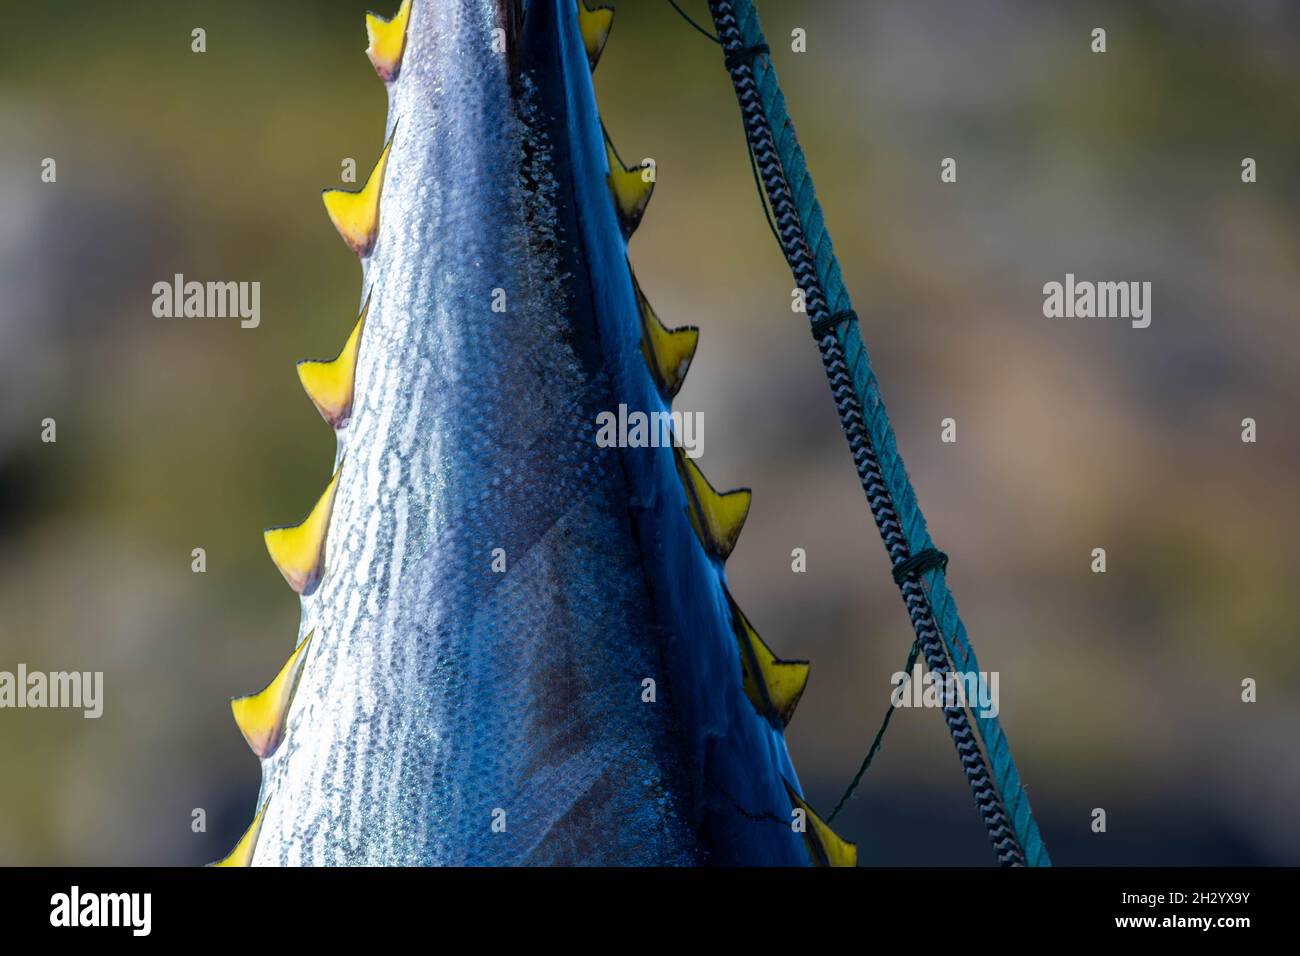 Atlantic bluefin tuna hanging by its dark blue and silver color tail with yellow caudal finlets leading down the body of the big saltwater fish. Stock Photo